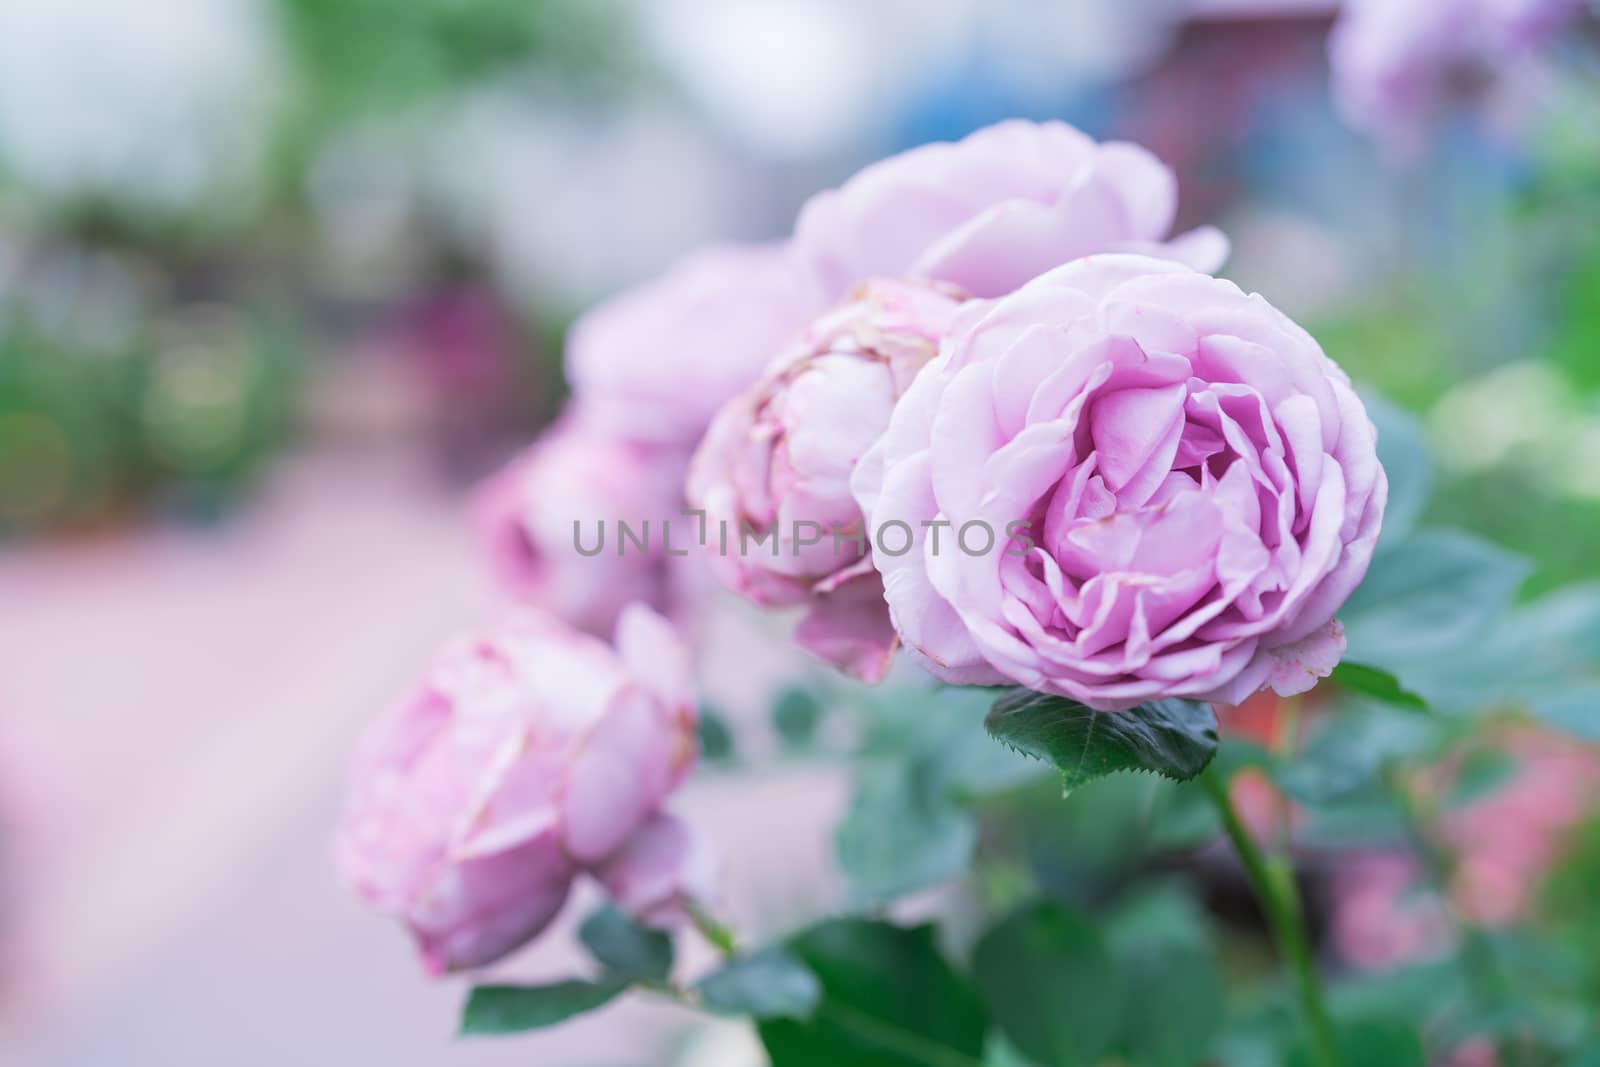 purple lavender rose flower on blurred backgrounds, selective focus  with copy space